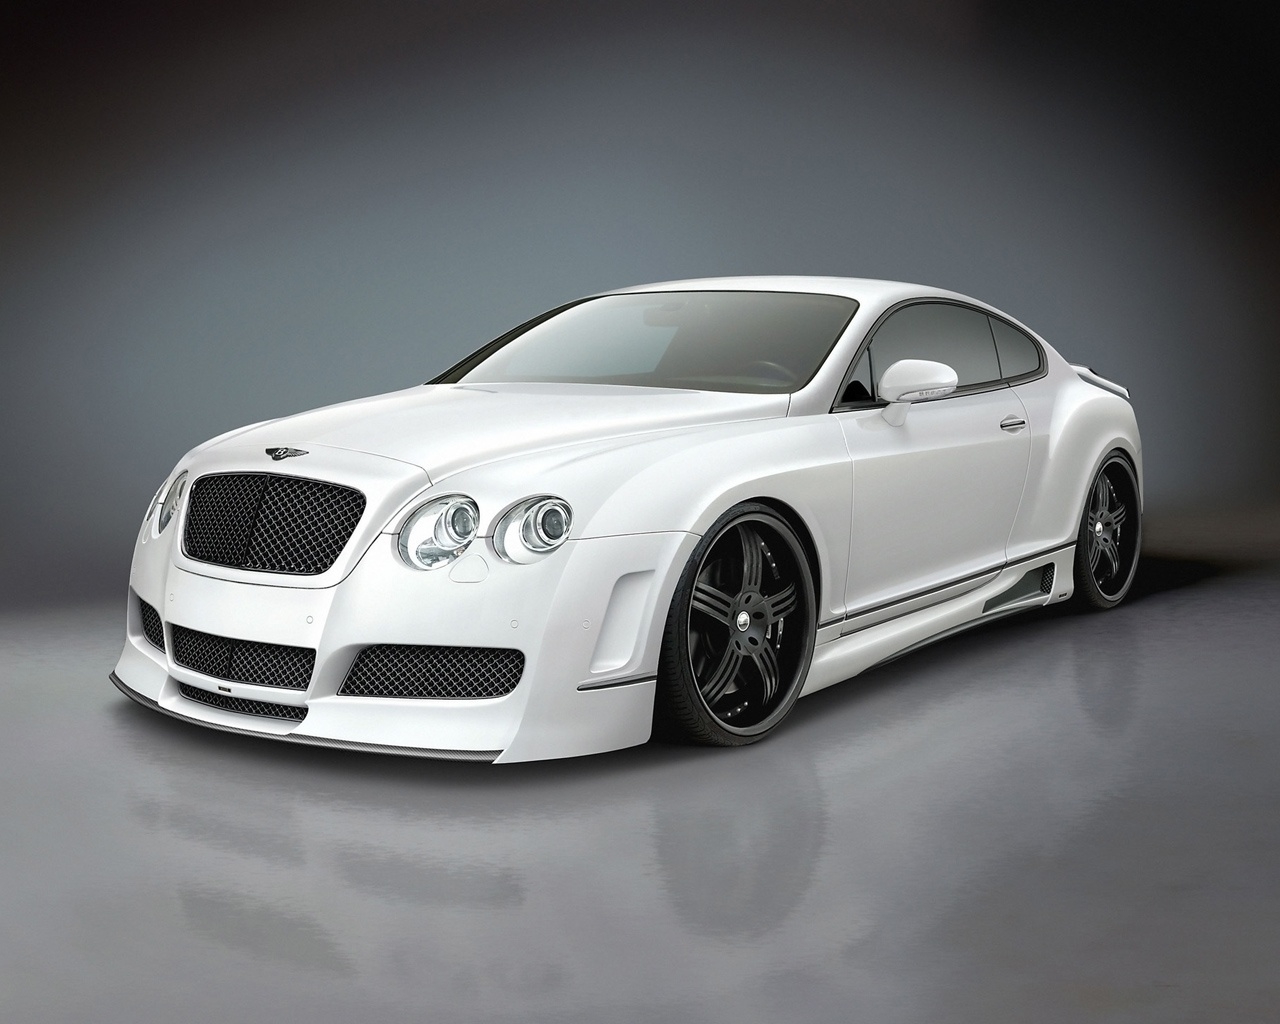 2009 Premier Bentley Continental GT for 1280 x 1024 resolution